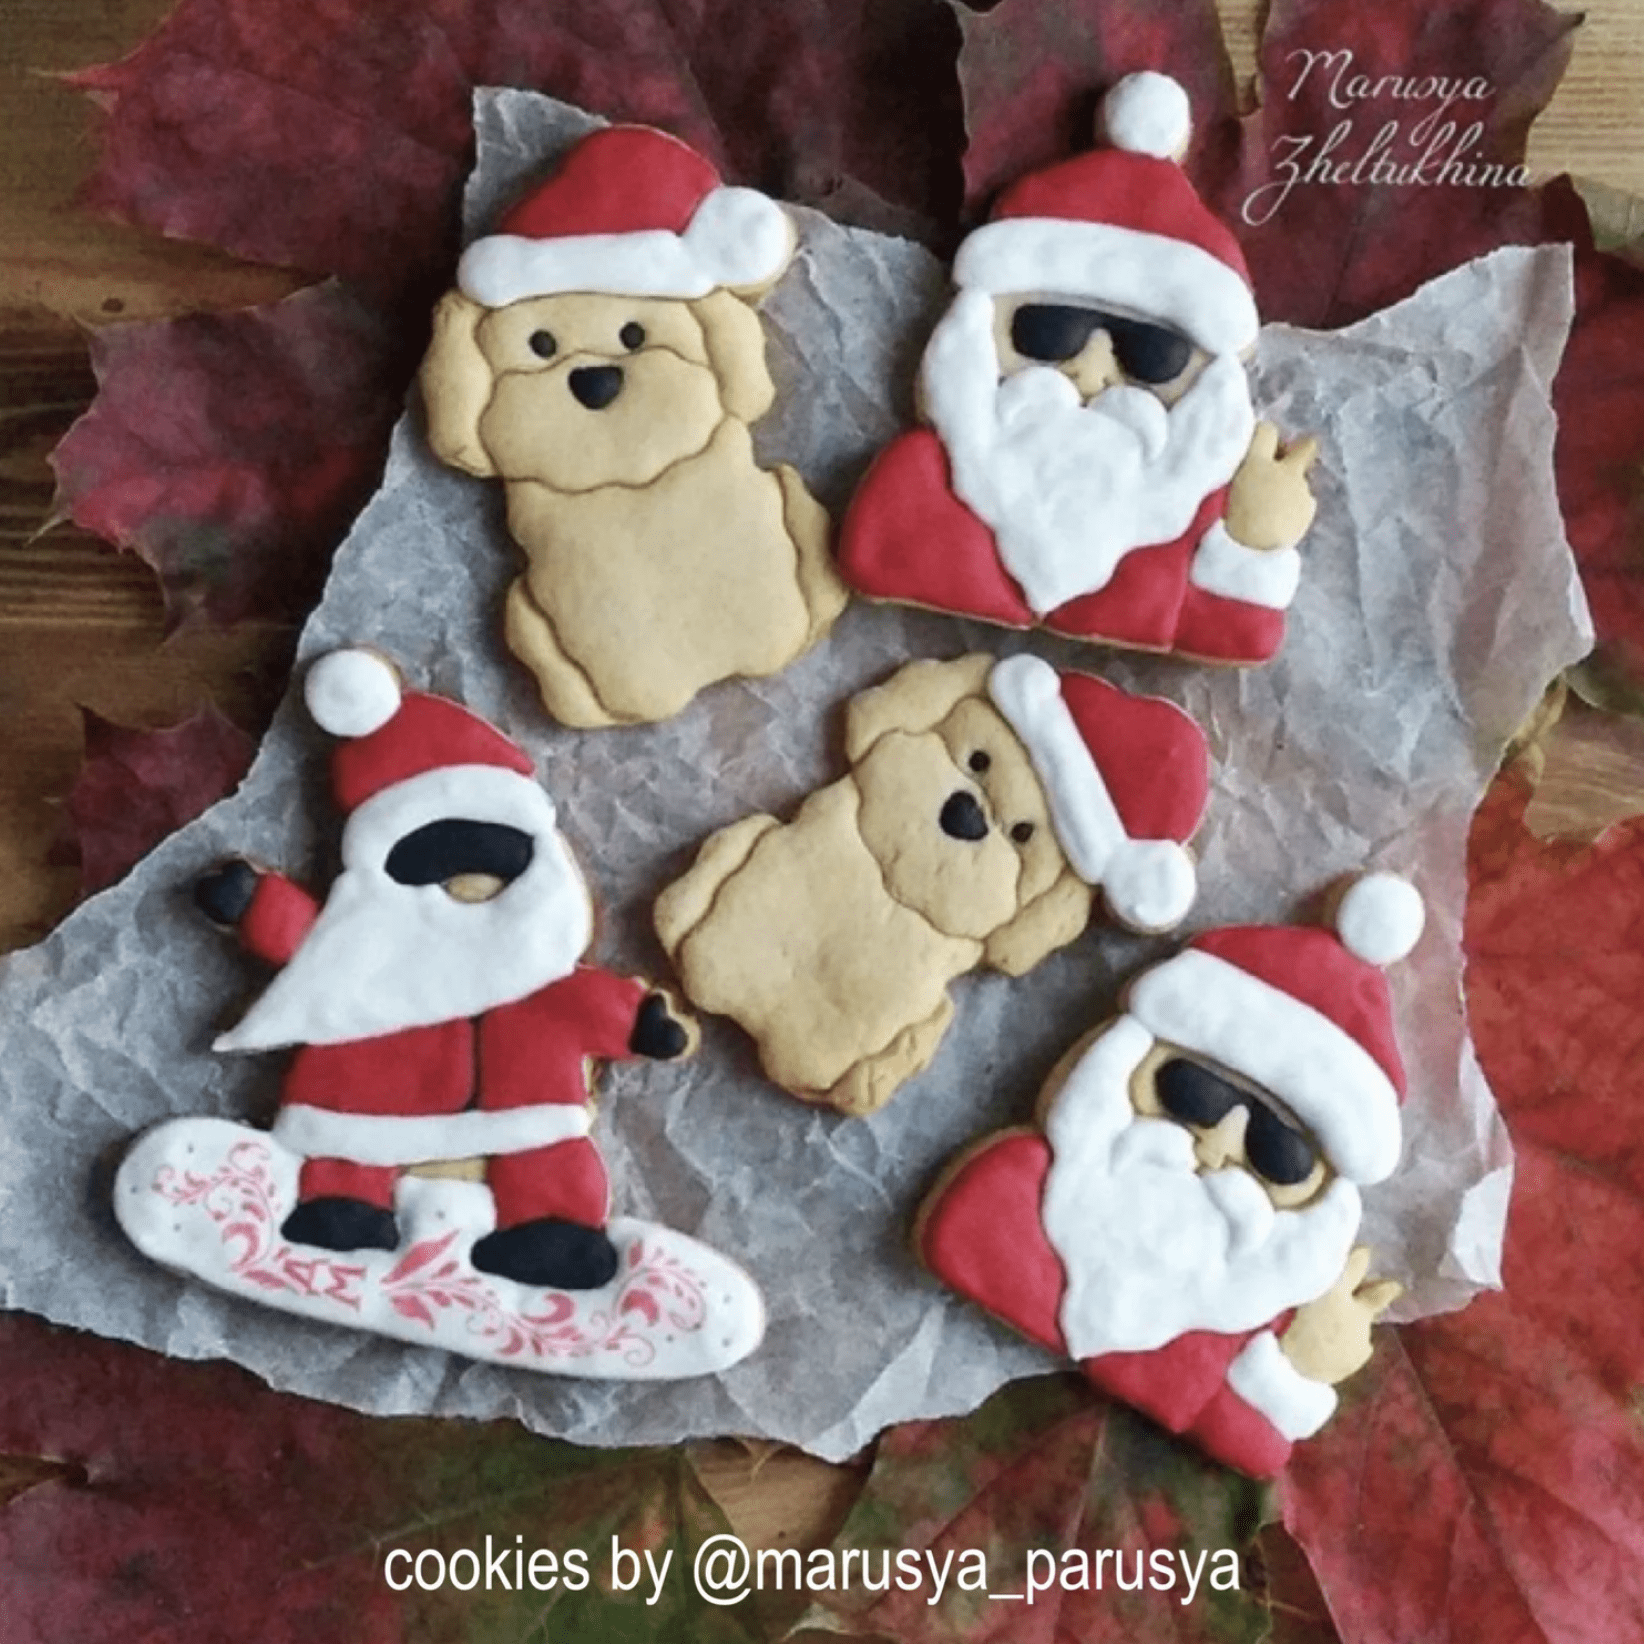 <p>Ho, ho, ho! Who's that coming down the slopes? It's <a href="https://www.etsy.com/listing/636681320/santa-claus-on-snowboard-cookie-cutter" rel="nofollow noopener noreferrer">snowboarding Santa</a> of course! Looks like the jolly man in red has traded in his sled for an amped up ride this winter. The only thing missing is his helmet.</p> <p class="listicle-page__cta-button-shop"><a class="shop-btn" href="https://www.etsy.com/listing/636681320/santa-claus-on-snowboard-cookie-cutter">Shop Now</a></p>